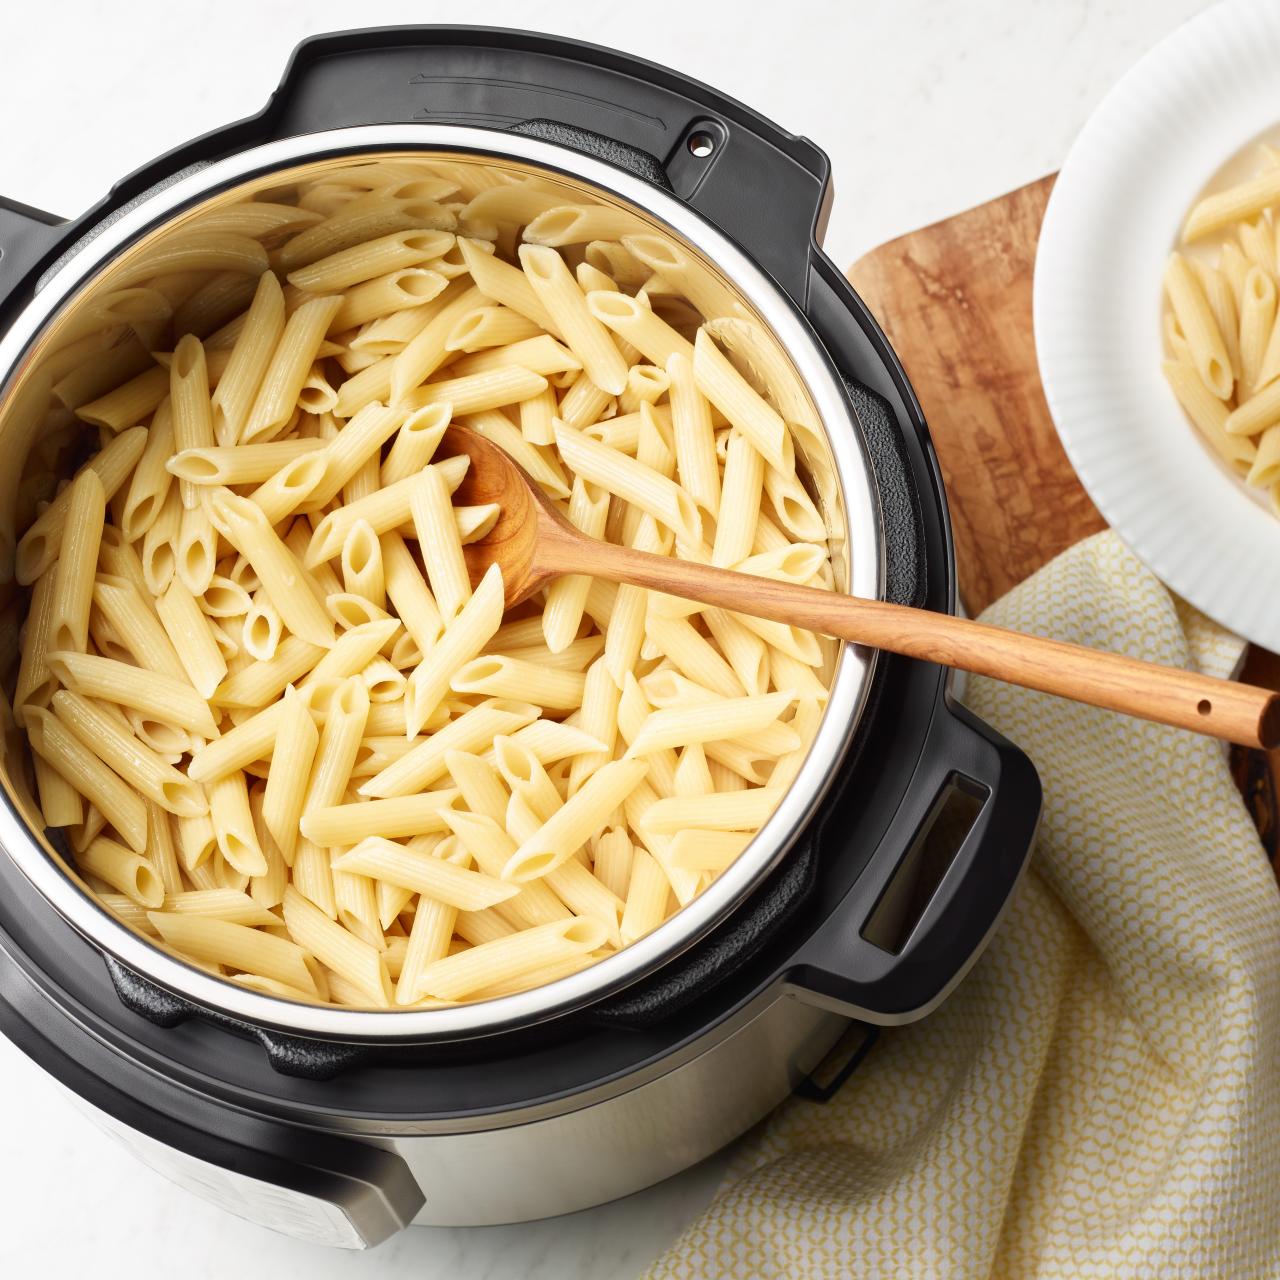 How To Cook Pasta In An Electric Pressure Cooker